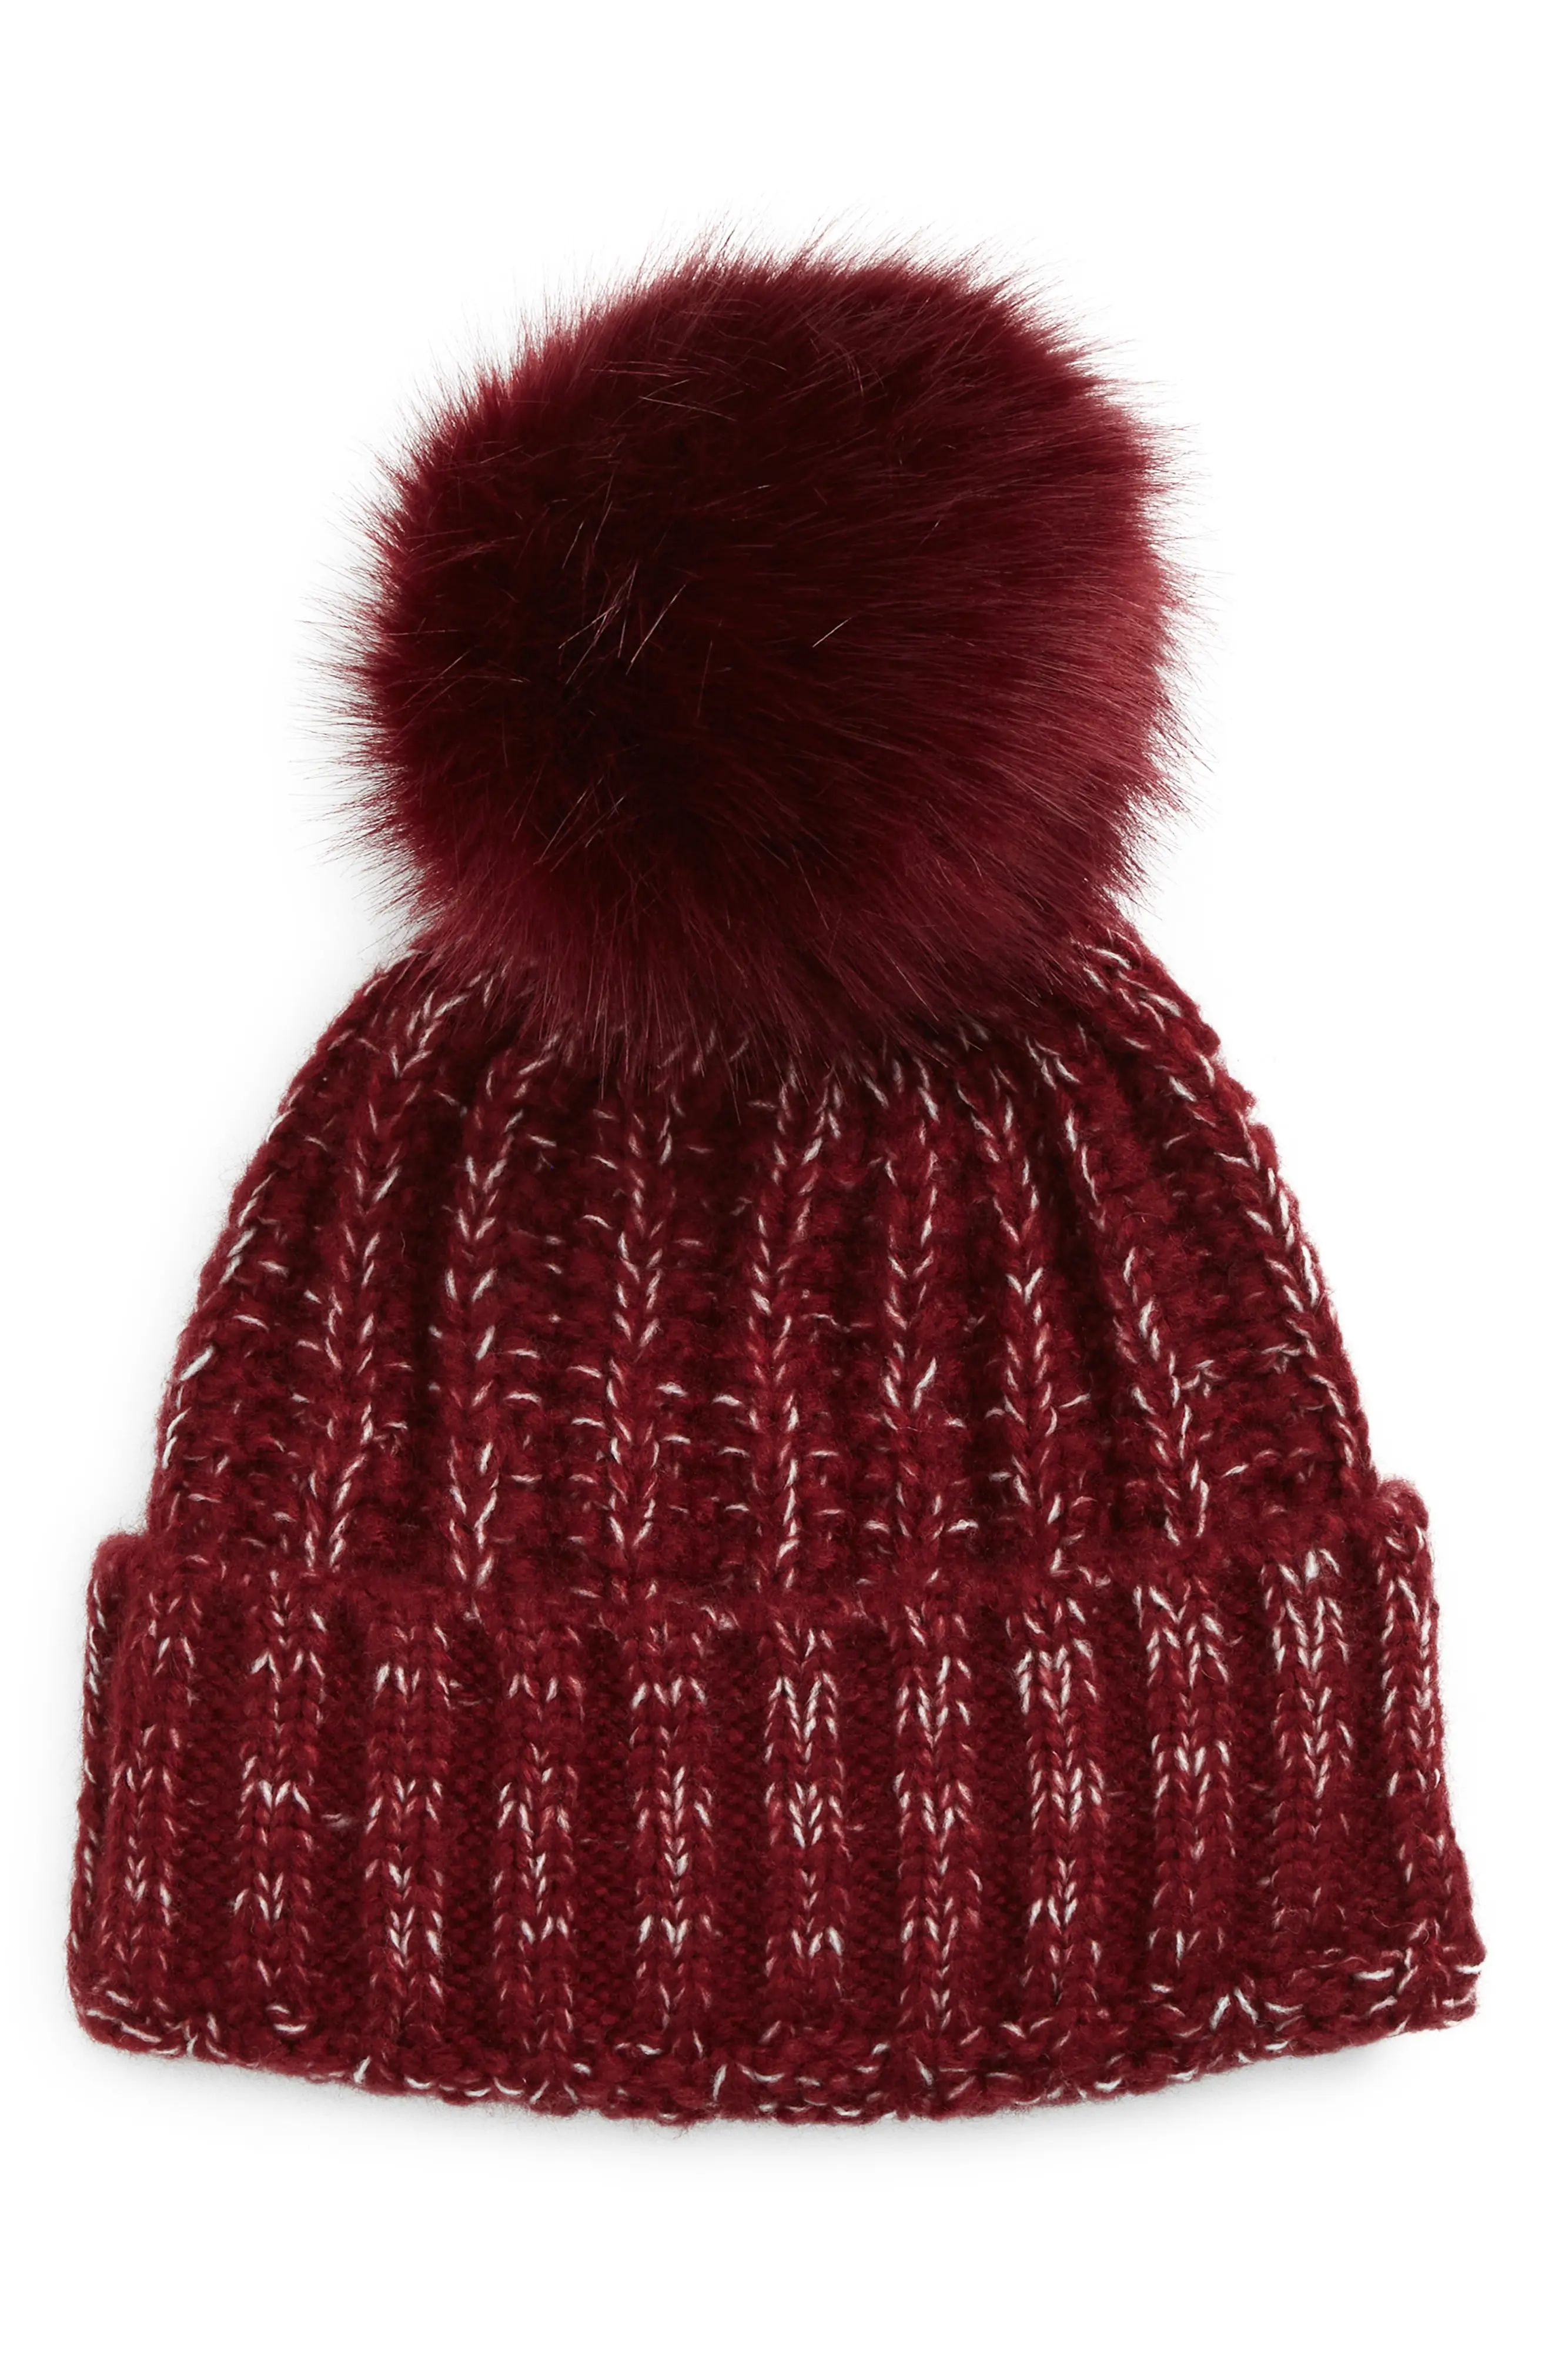 Kyi Kyi Chunky Wool Blend Beanie with Faux Fur Pom in Bordo at Nordstrom | Nordstrom